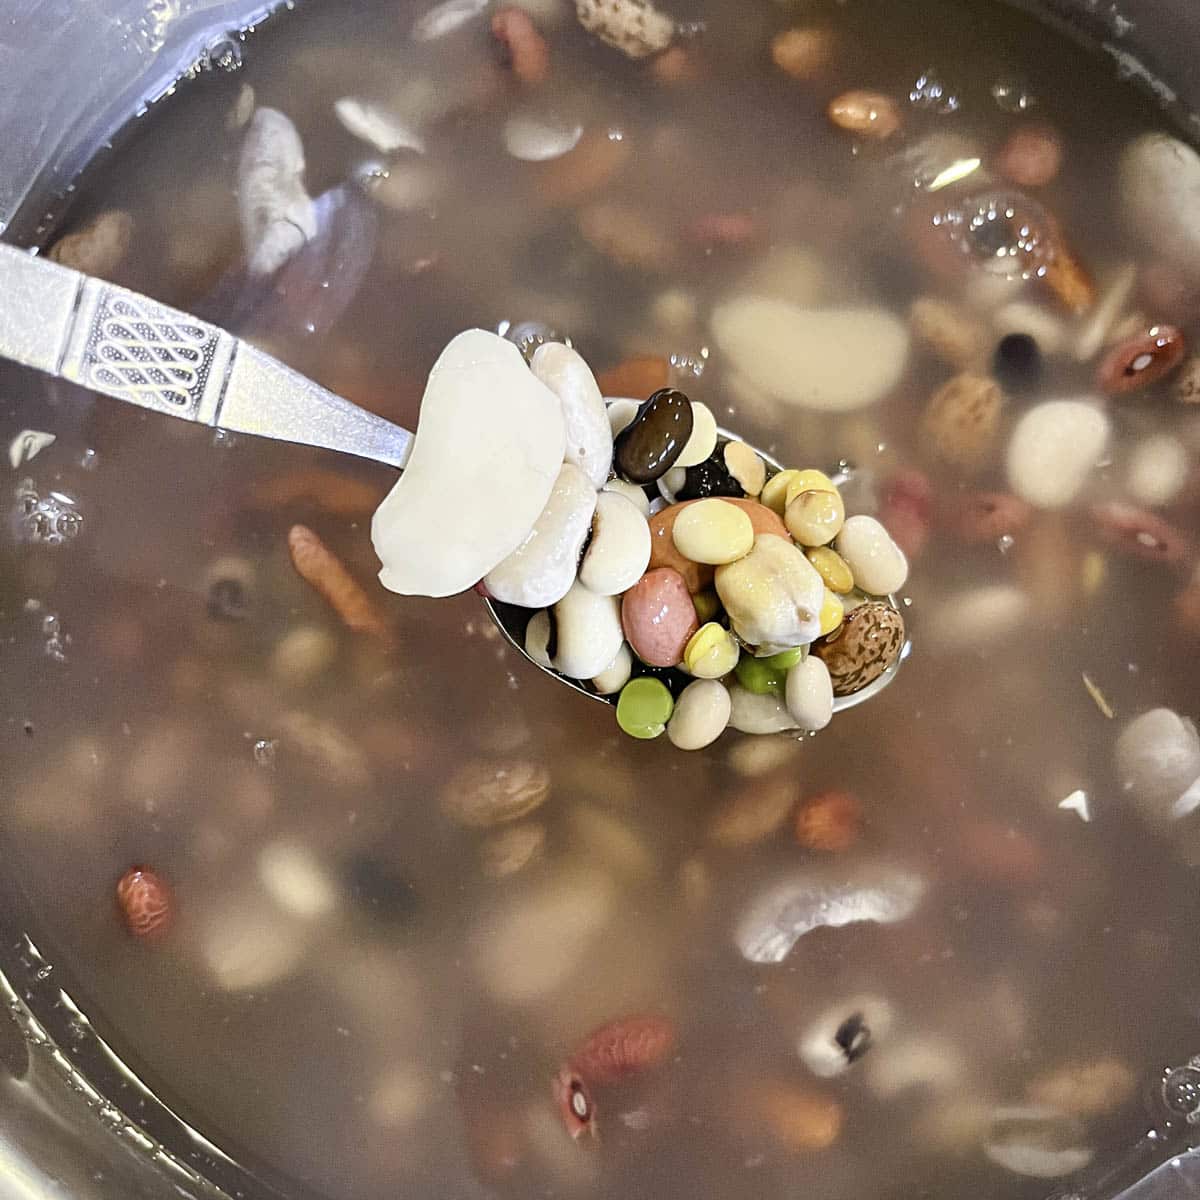 13 bean soup mix soaking in water